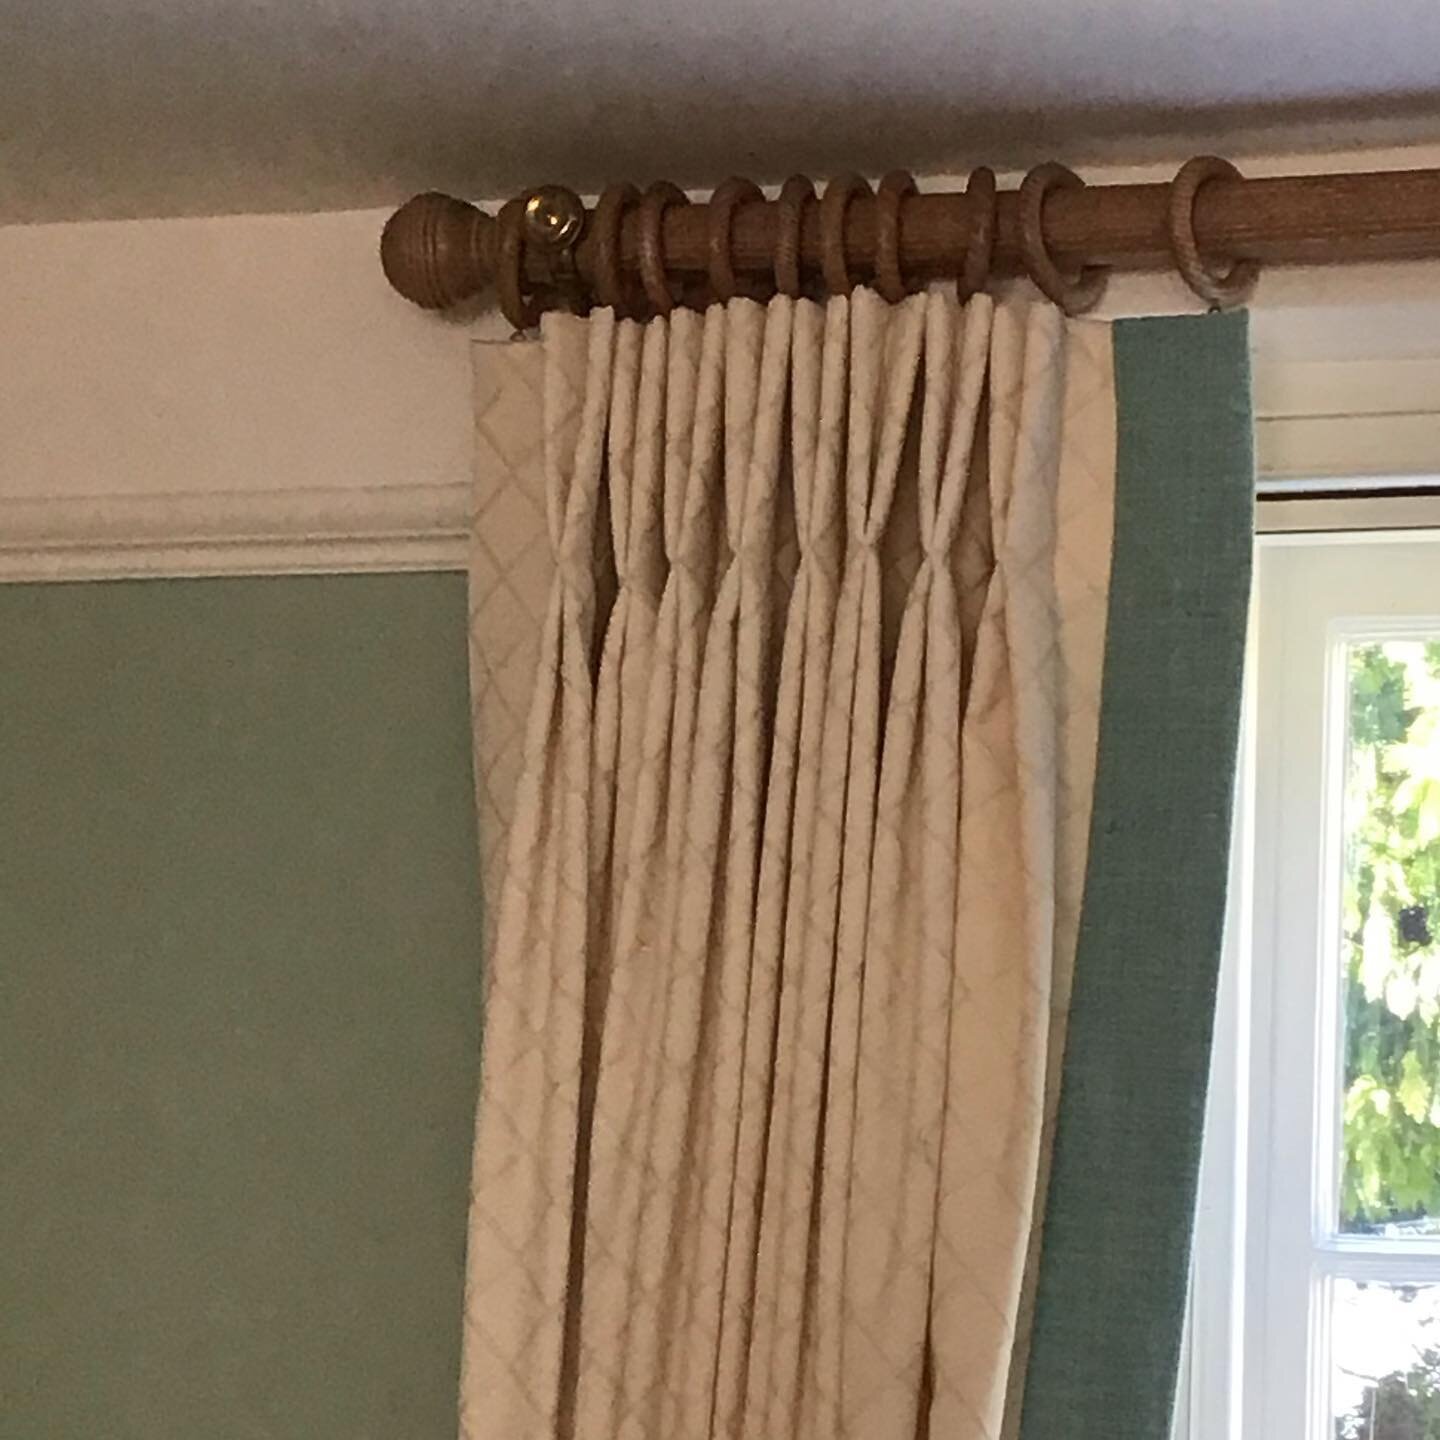 Though the showroom is shut, work still goes on behind the scenes. From one of our carefully selected preloved stock, we repurposed a pair curtains to produce a pair of curtains and 3 roman blinds with contrast trim to match the wall colour.  If you 